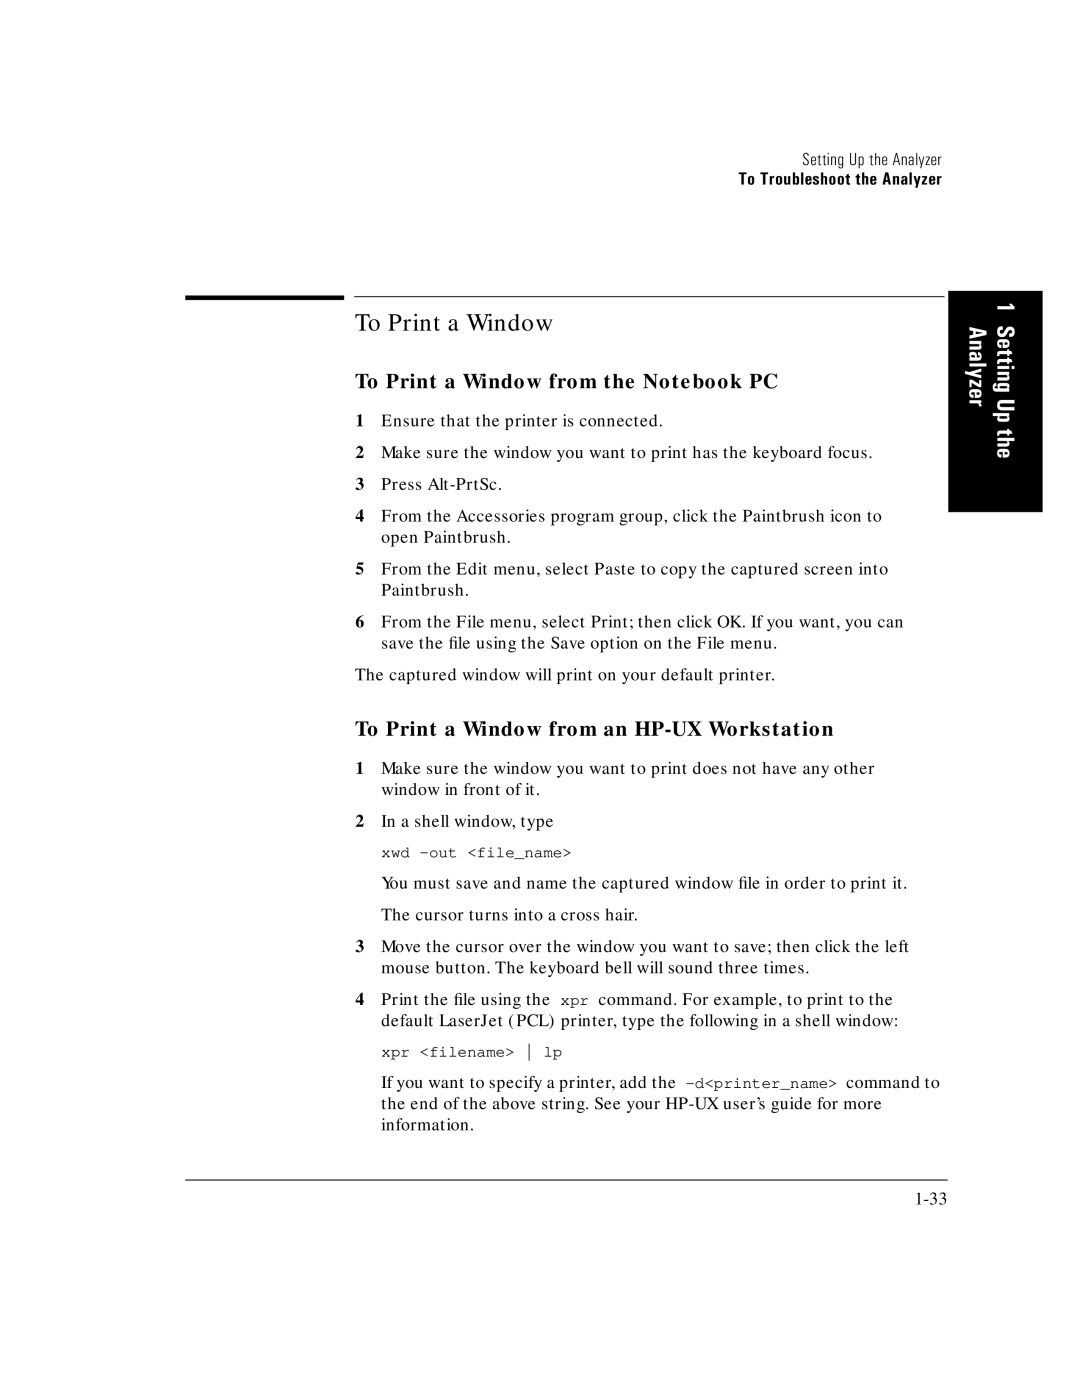 HP E5200A manual To Print a Window from the Notebook PC, To Print a Window from an HP-UX Workstation 